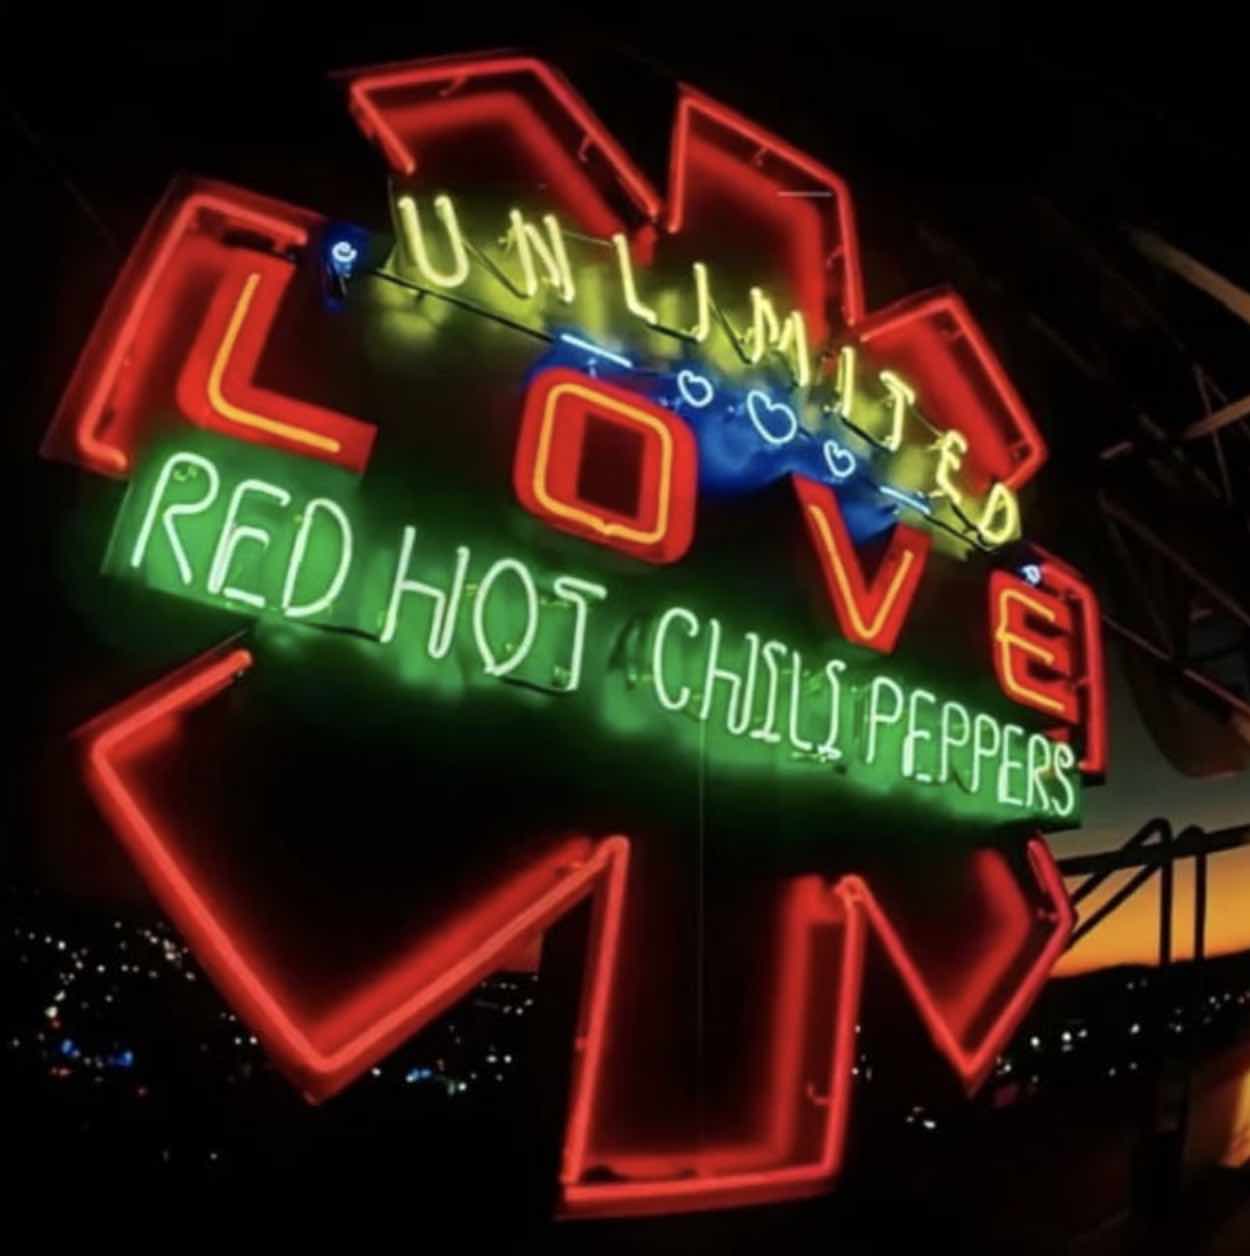 unlimited love - red hot chili peppers -